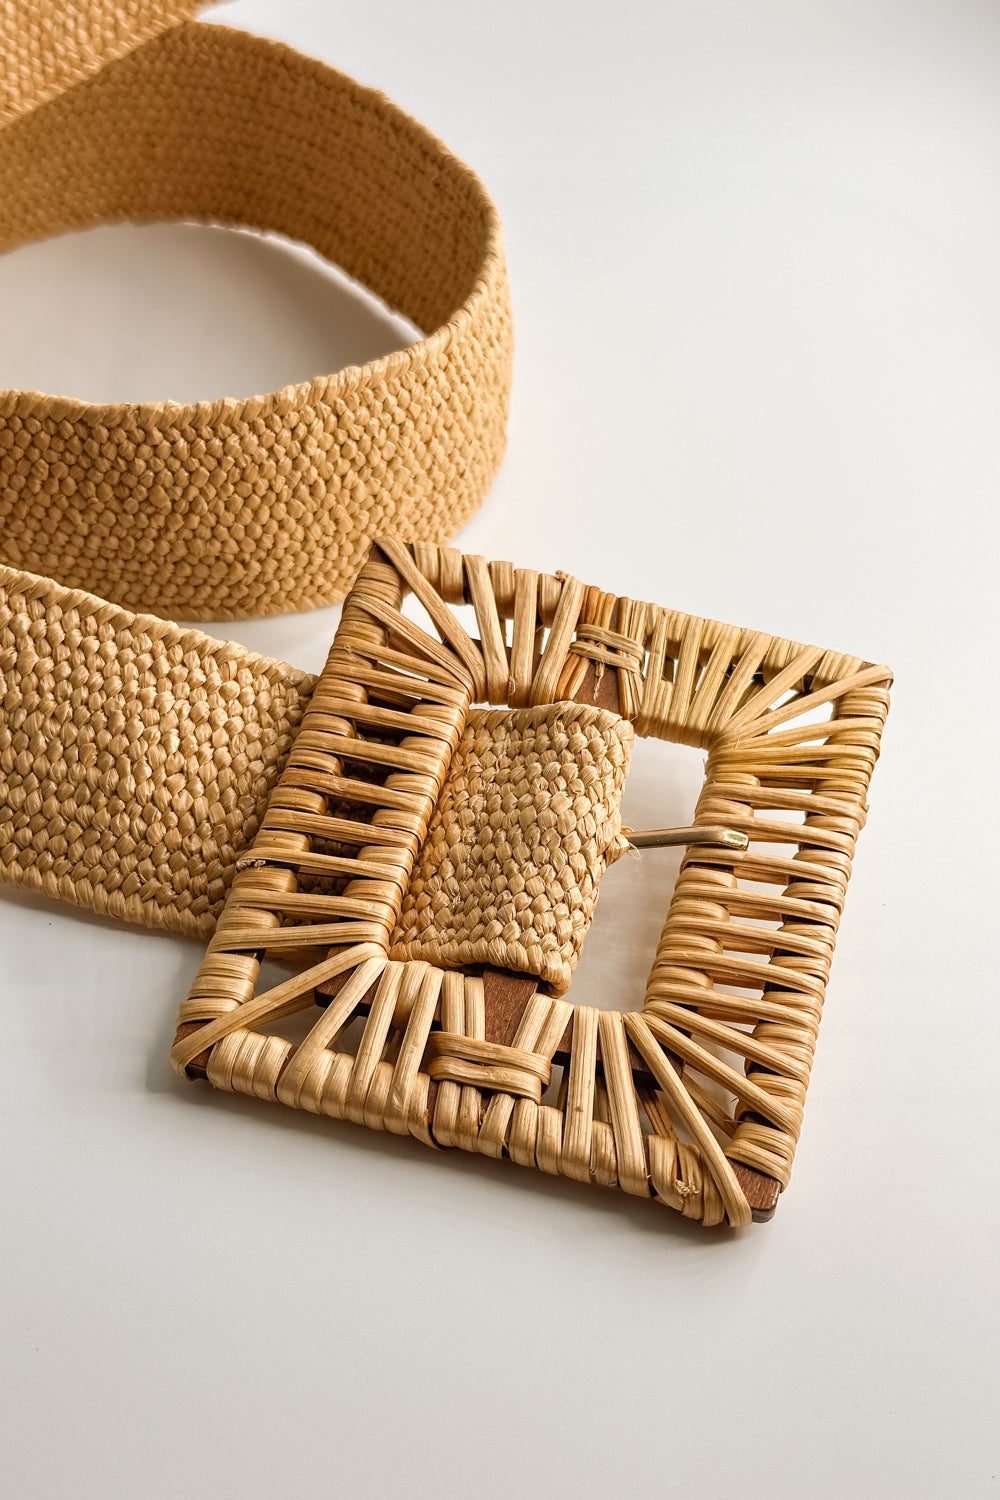 Close up view of the Savannah Tan Rattan Square Adjustable Belt which features tan rattan fabric, square rattan adjustable buckle